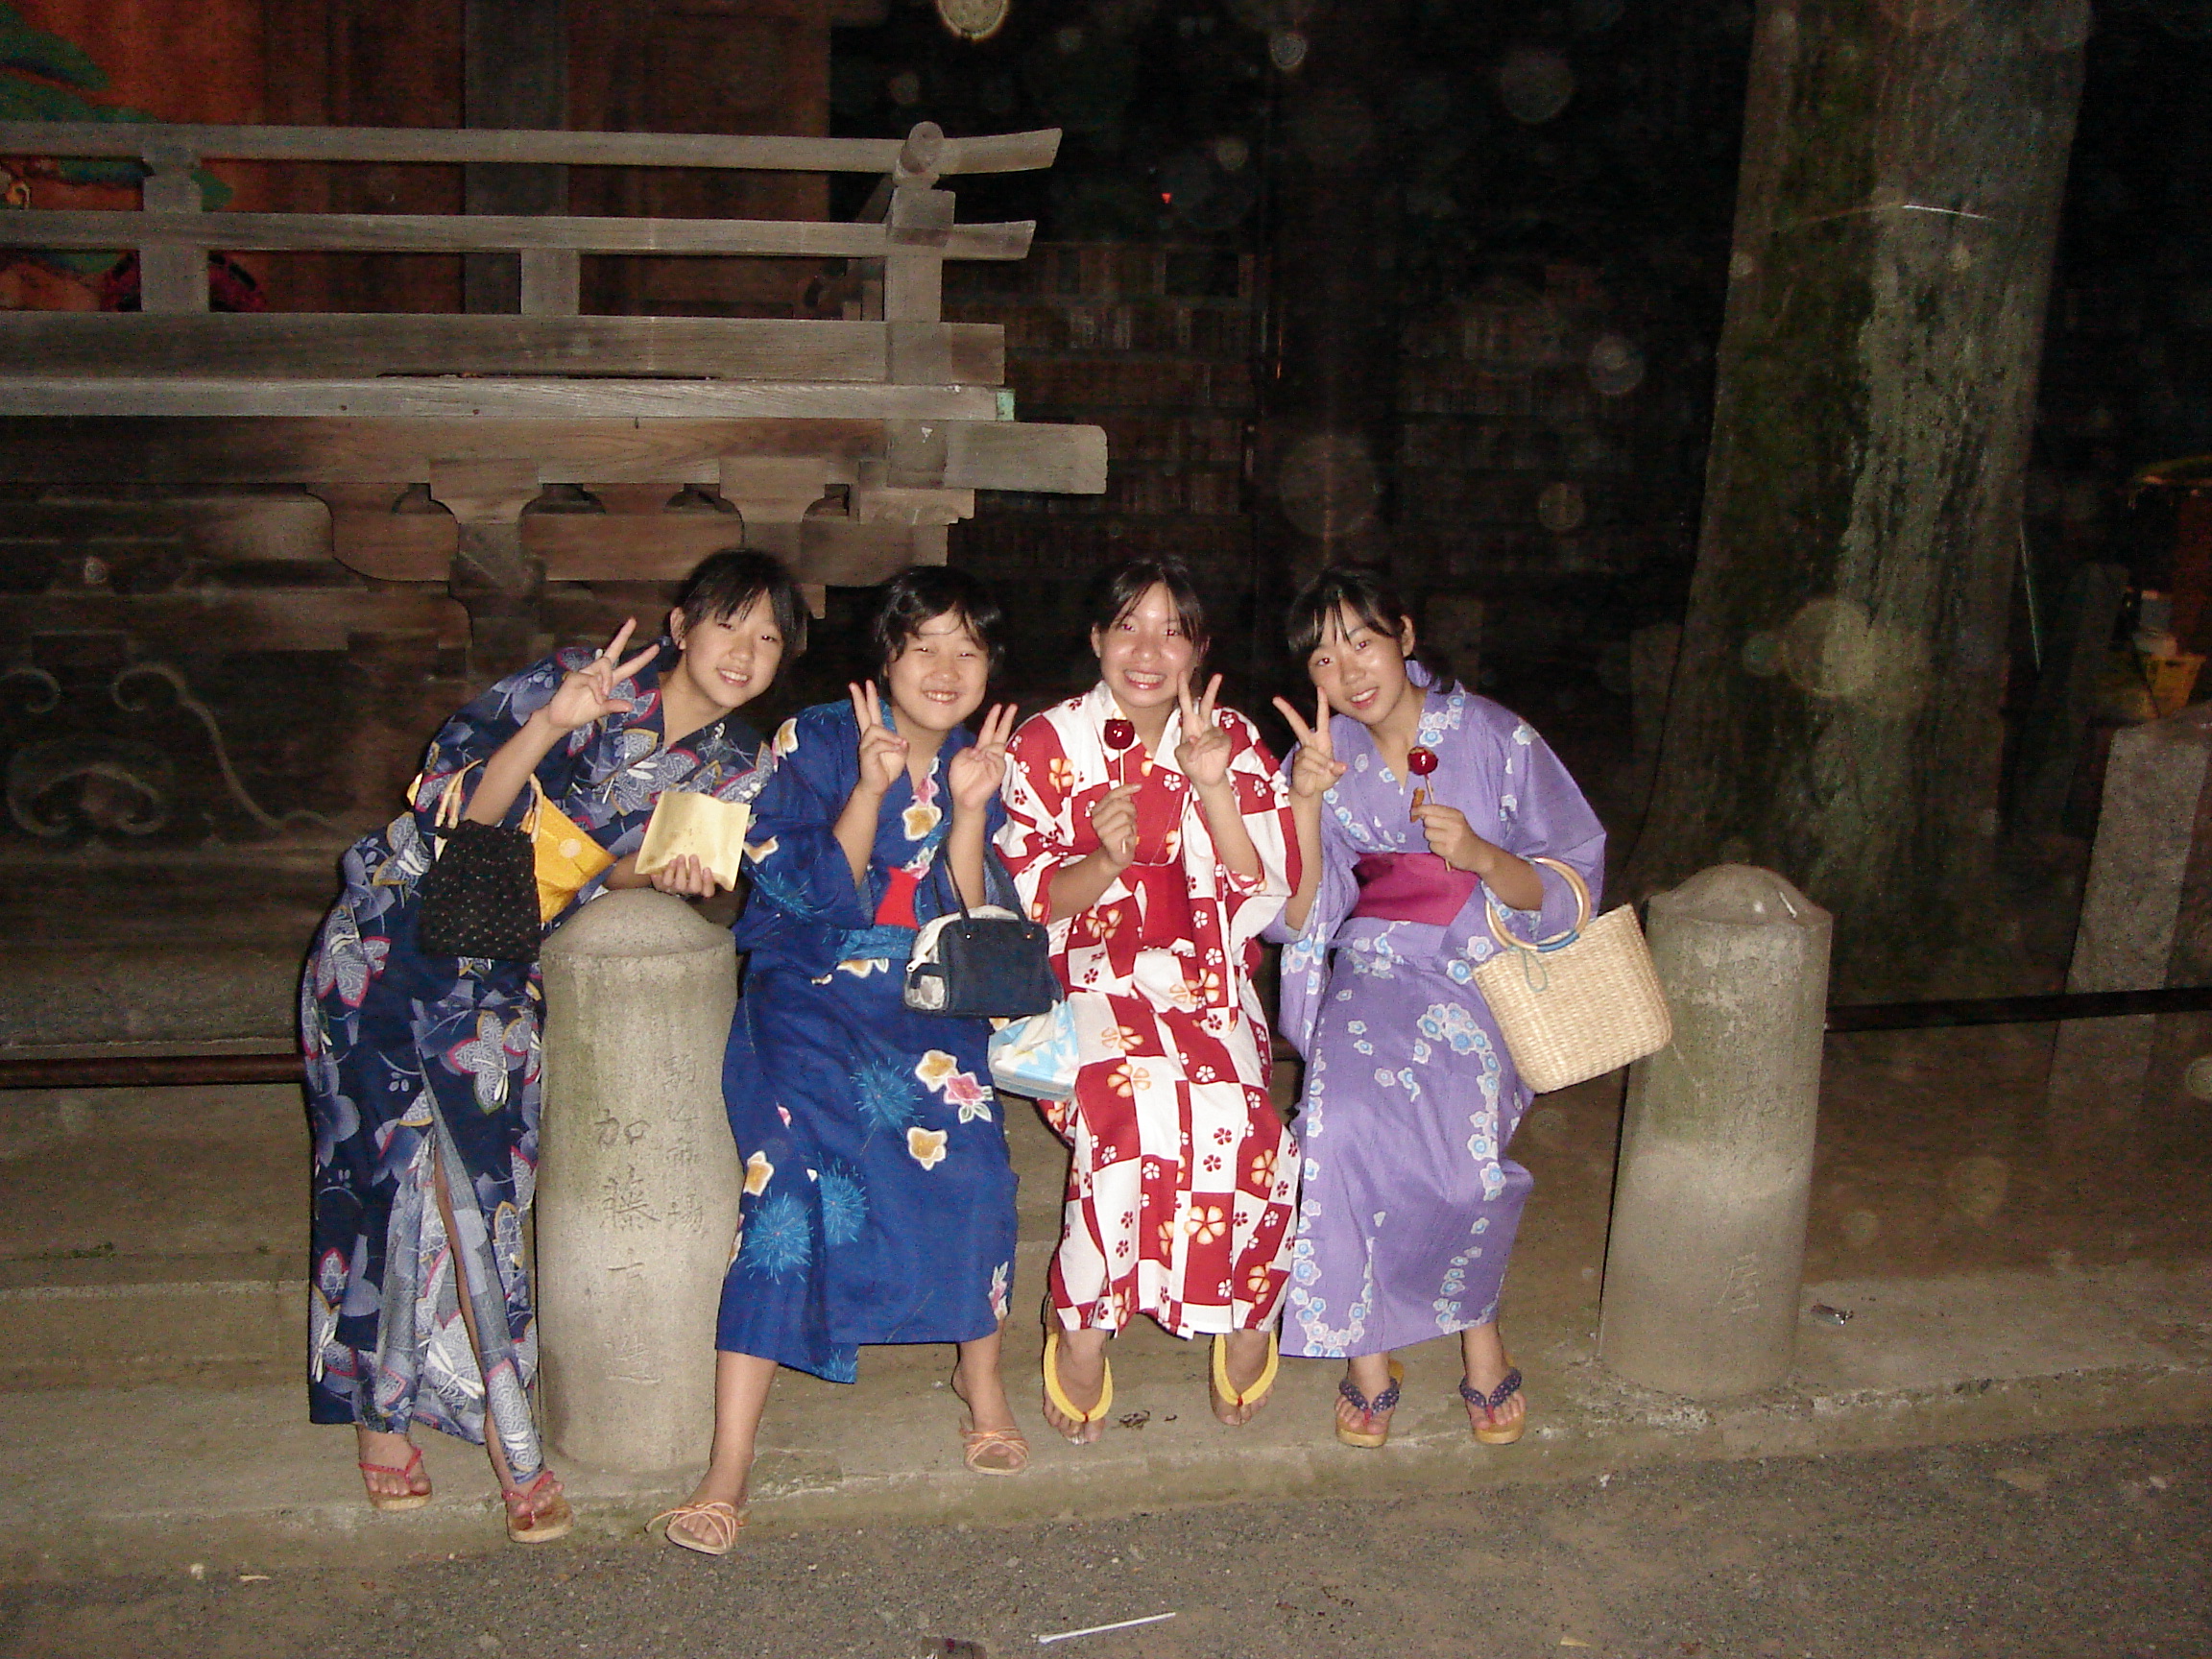 a group of young women in yukata make peace signs